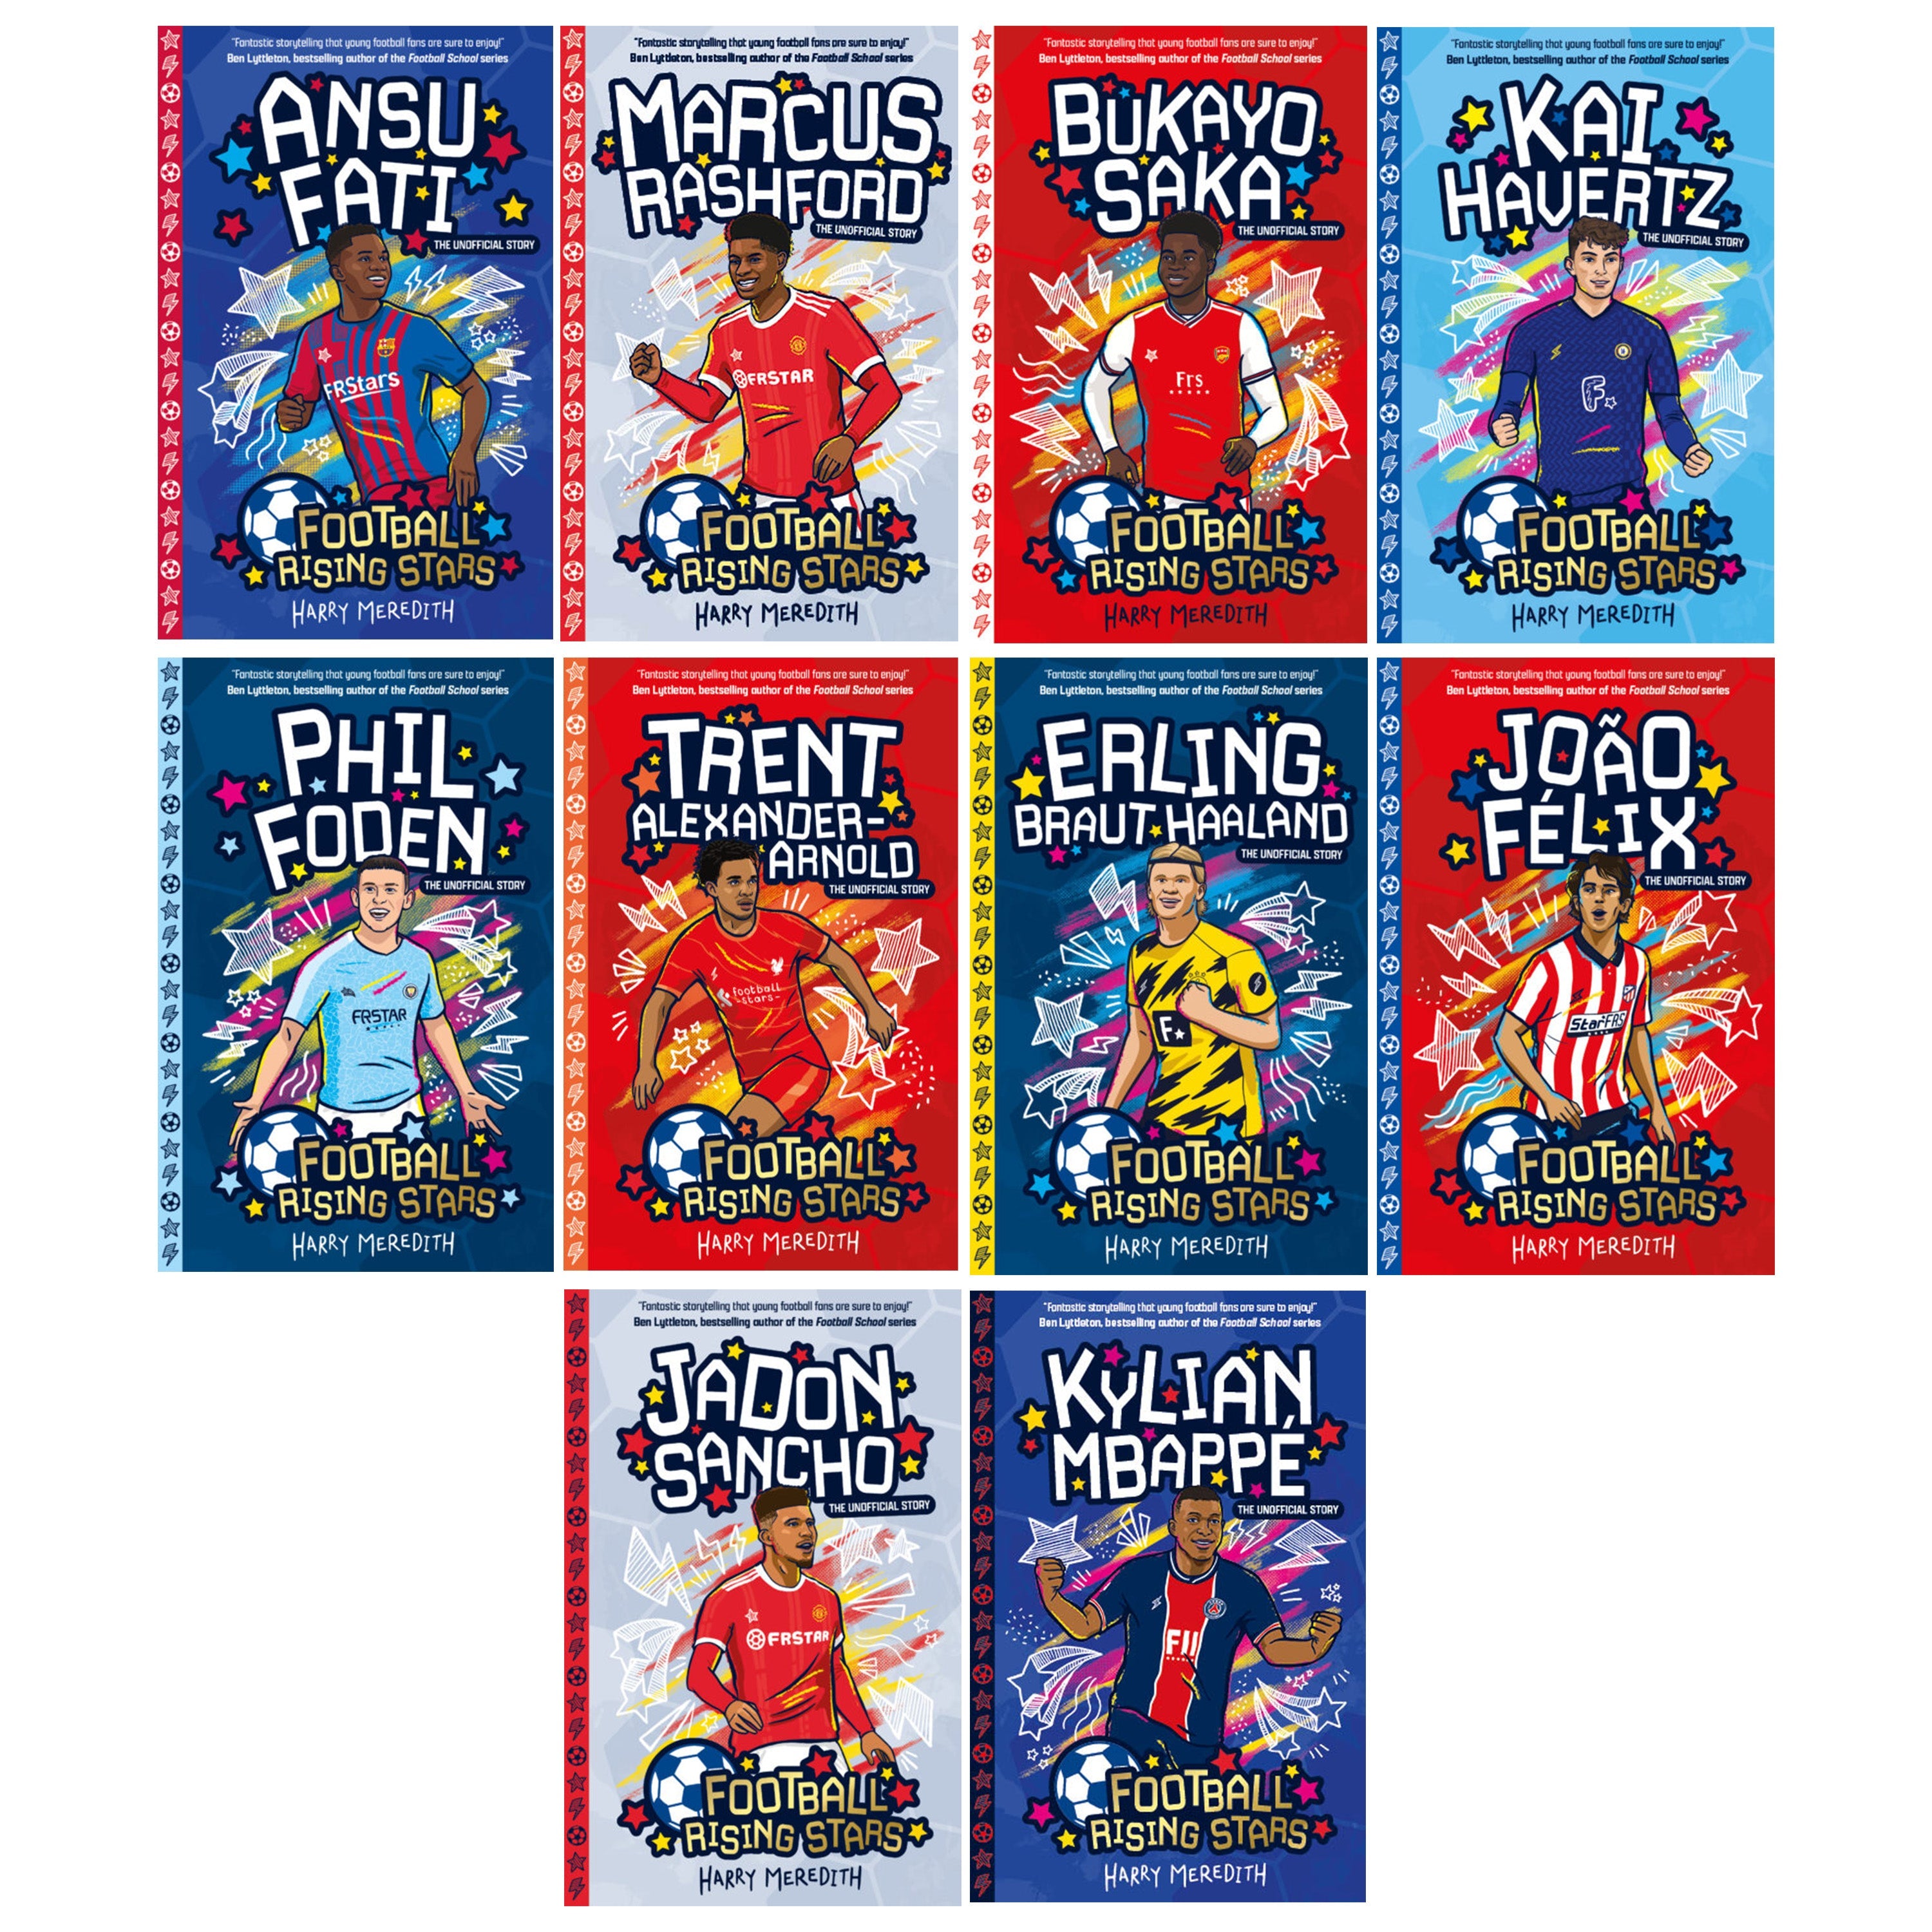 Football Rising Stars 10 Books Box Set By Harry Meredith - Ages 7-9 - Paperback